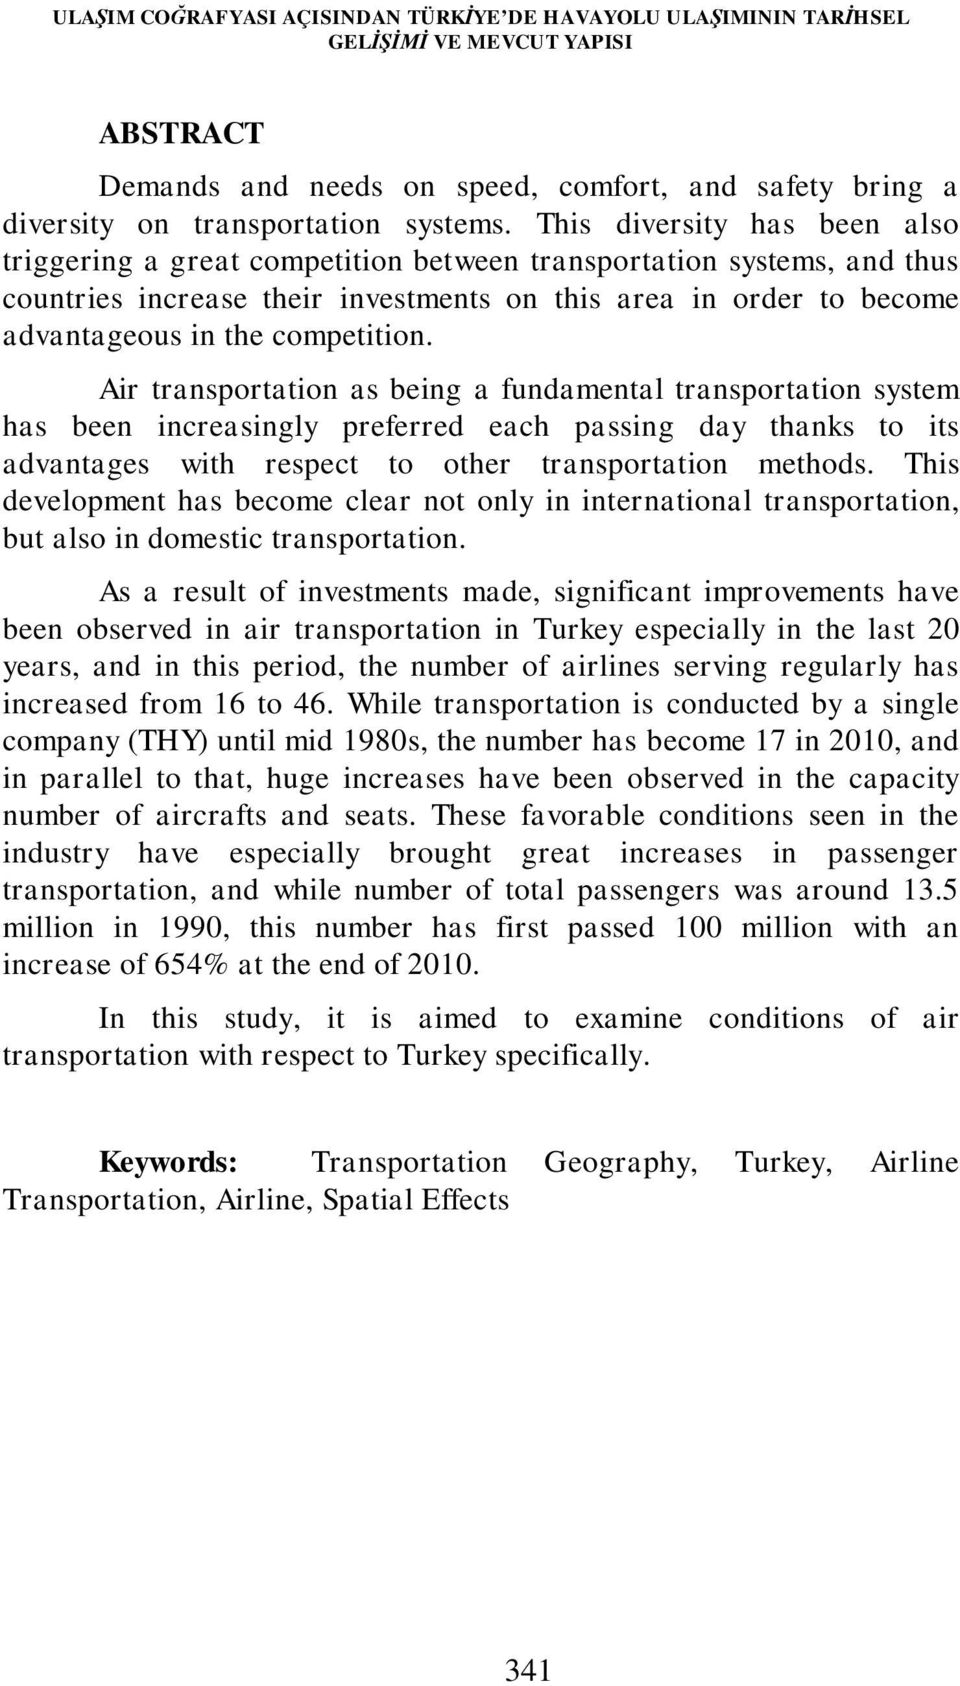 competition. Air transportation as being a fundamental transportation system has been increasingly preferred each passing day thanks to its advantages with respect to other transportation methods.